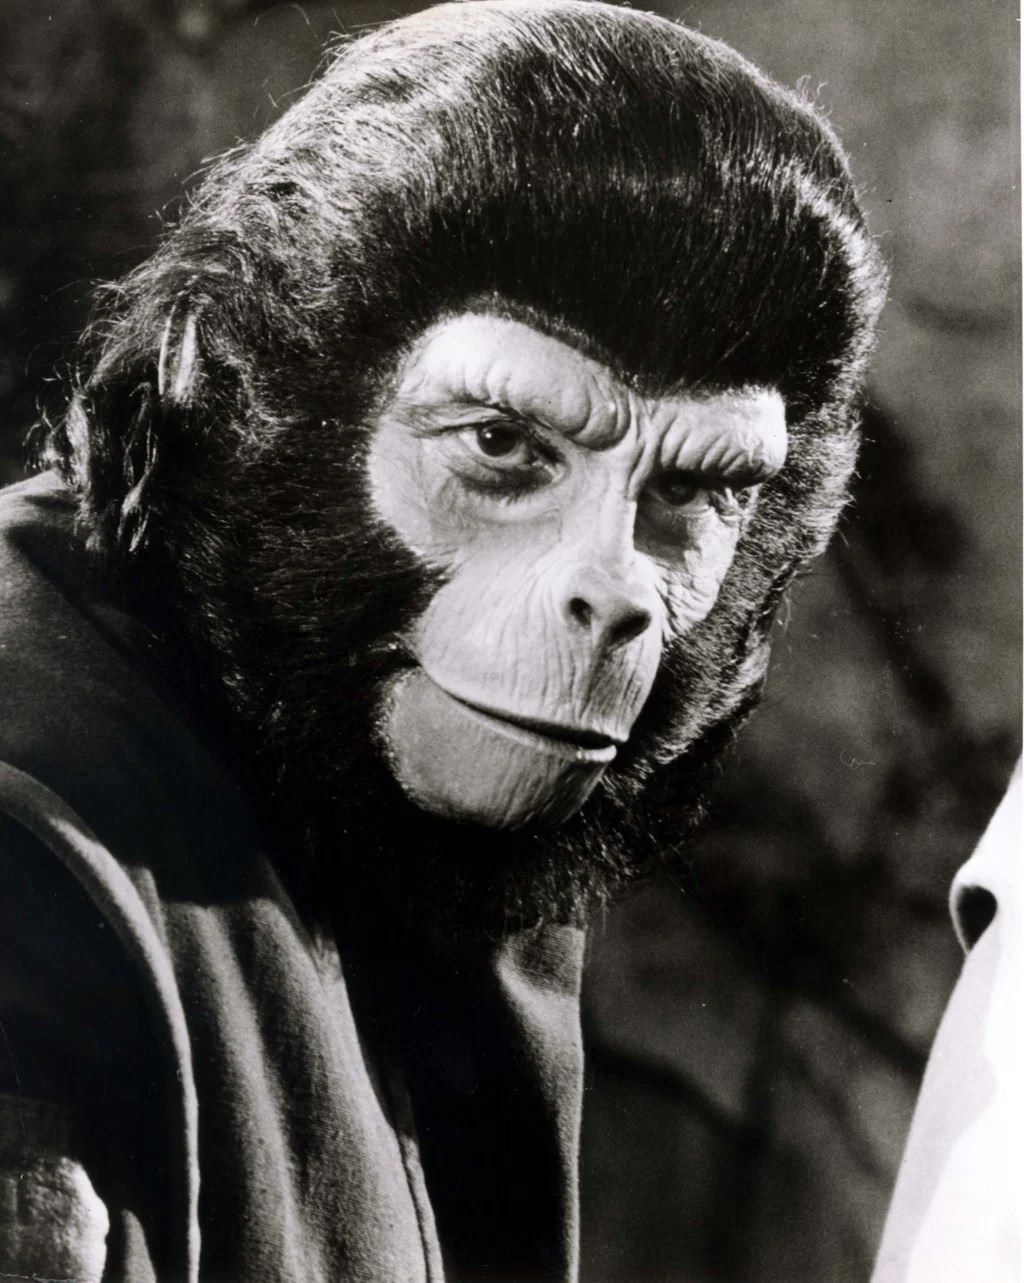 Roddy Mcdowall in character as Cornelius, Planet of the Apes, 1968.